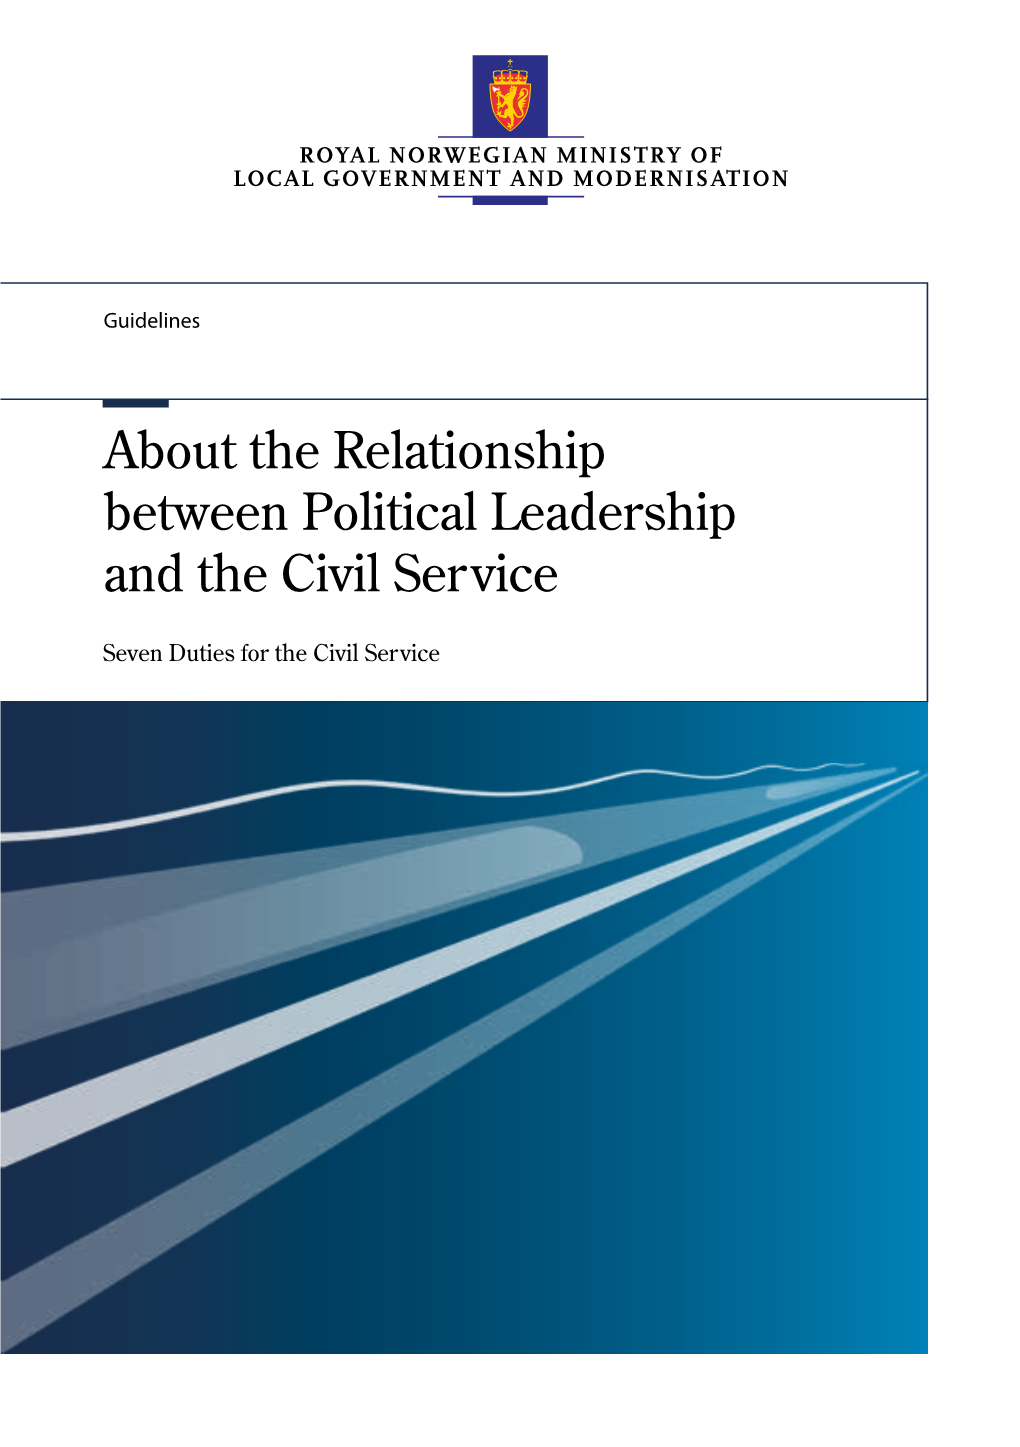 About the Relationship Between Political Leadership and the Civil Service Publication Number: H-2436 E